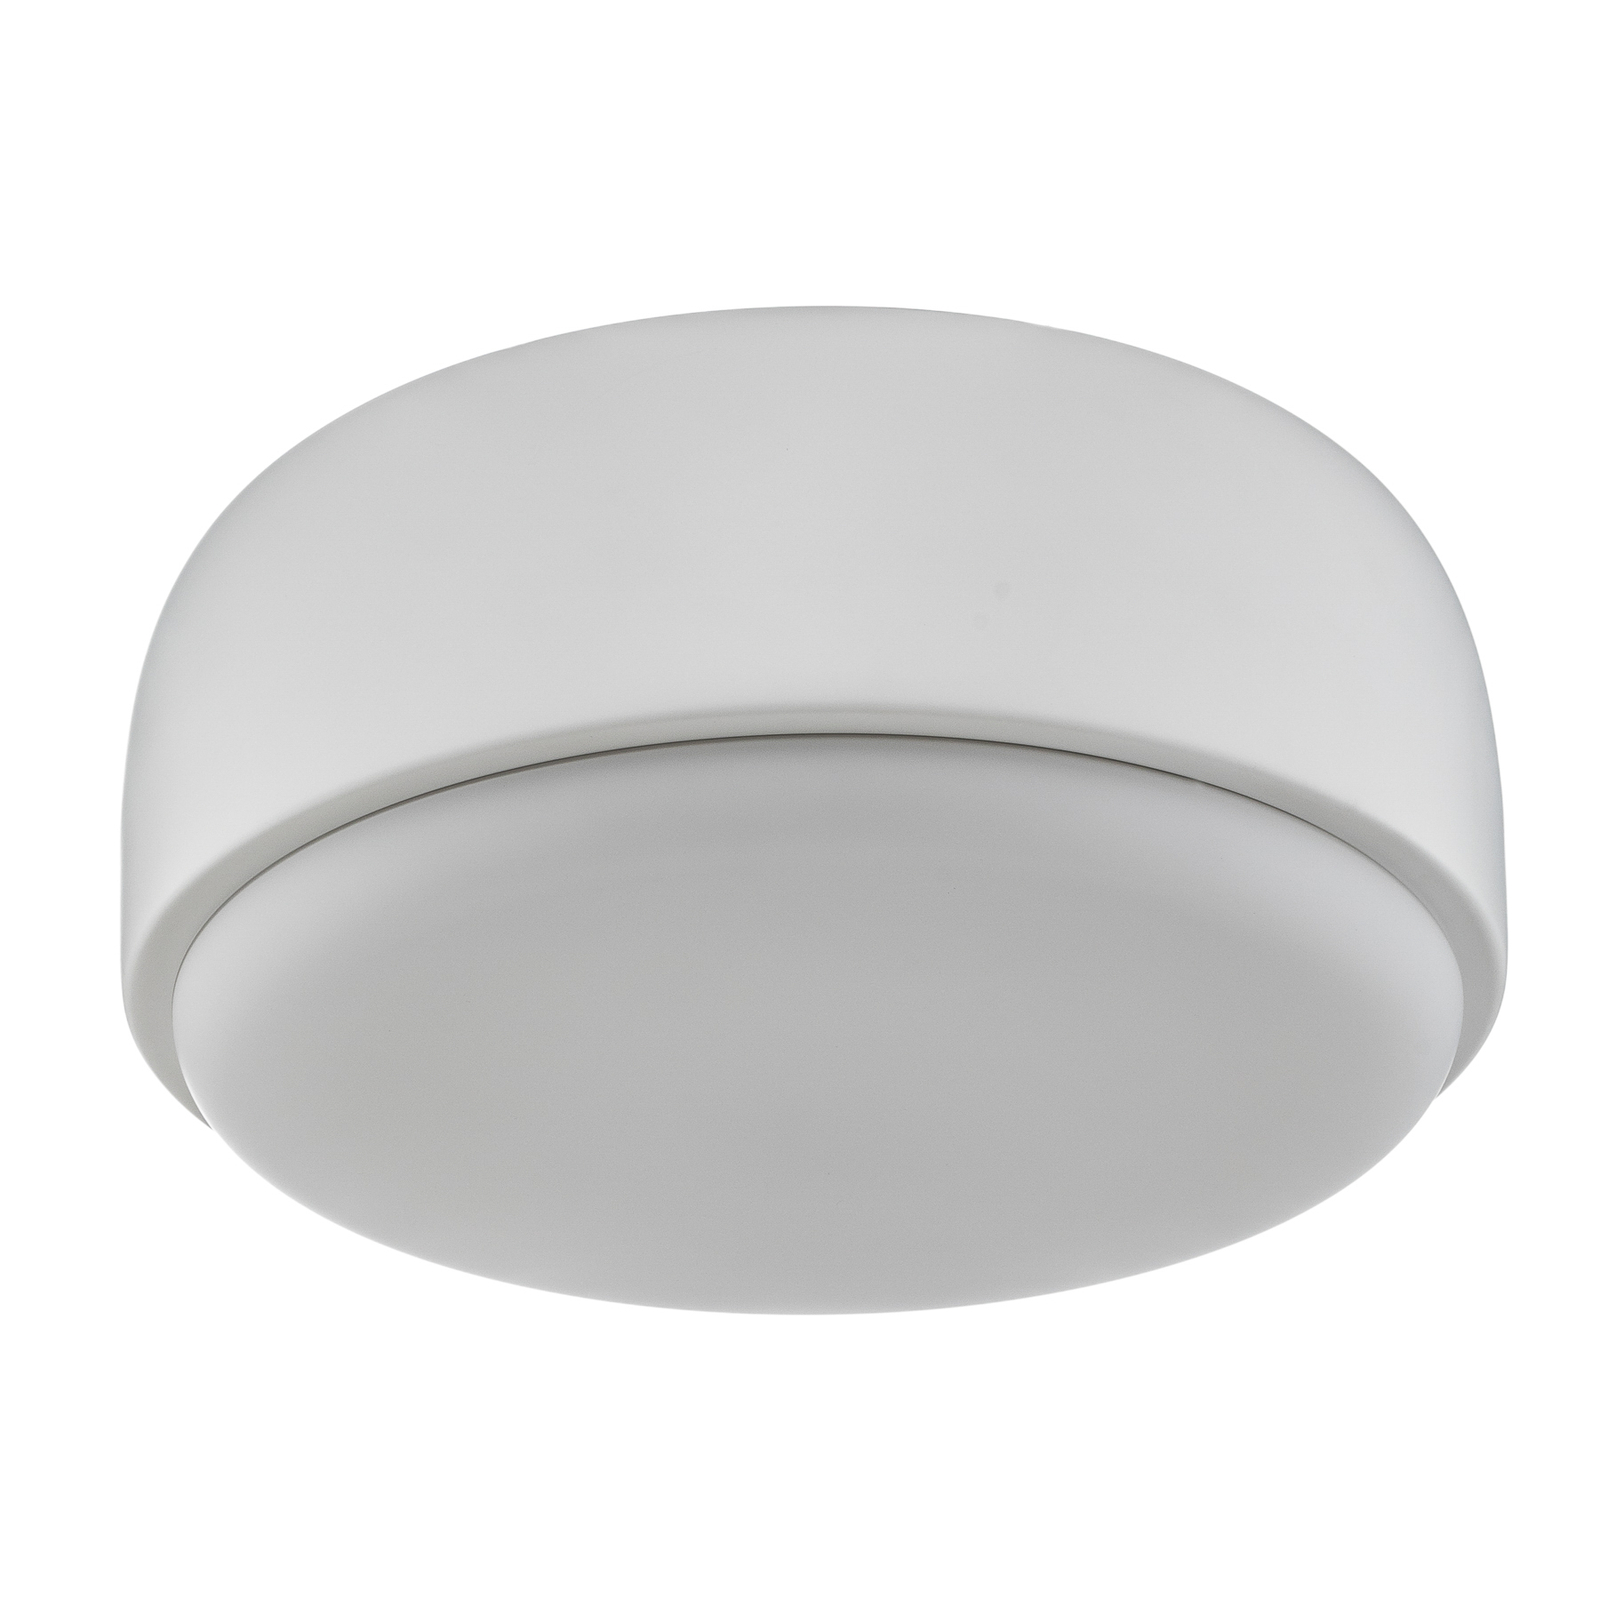 Northern Over Me ceiling light white 30 cm